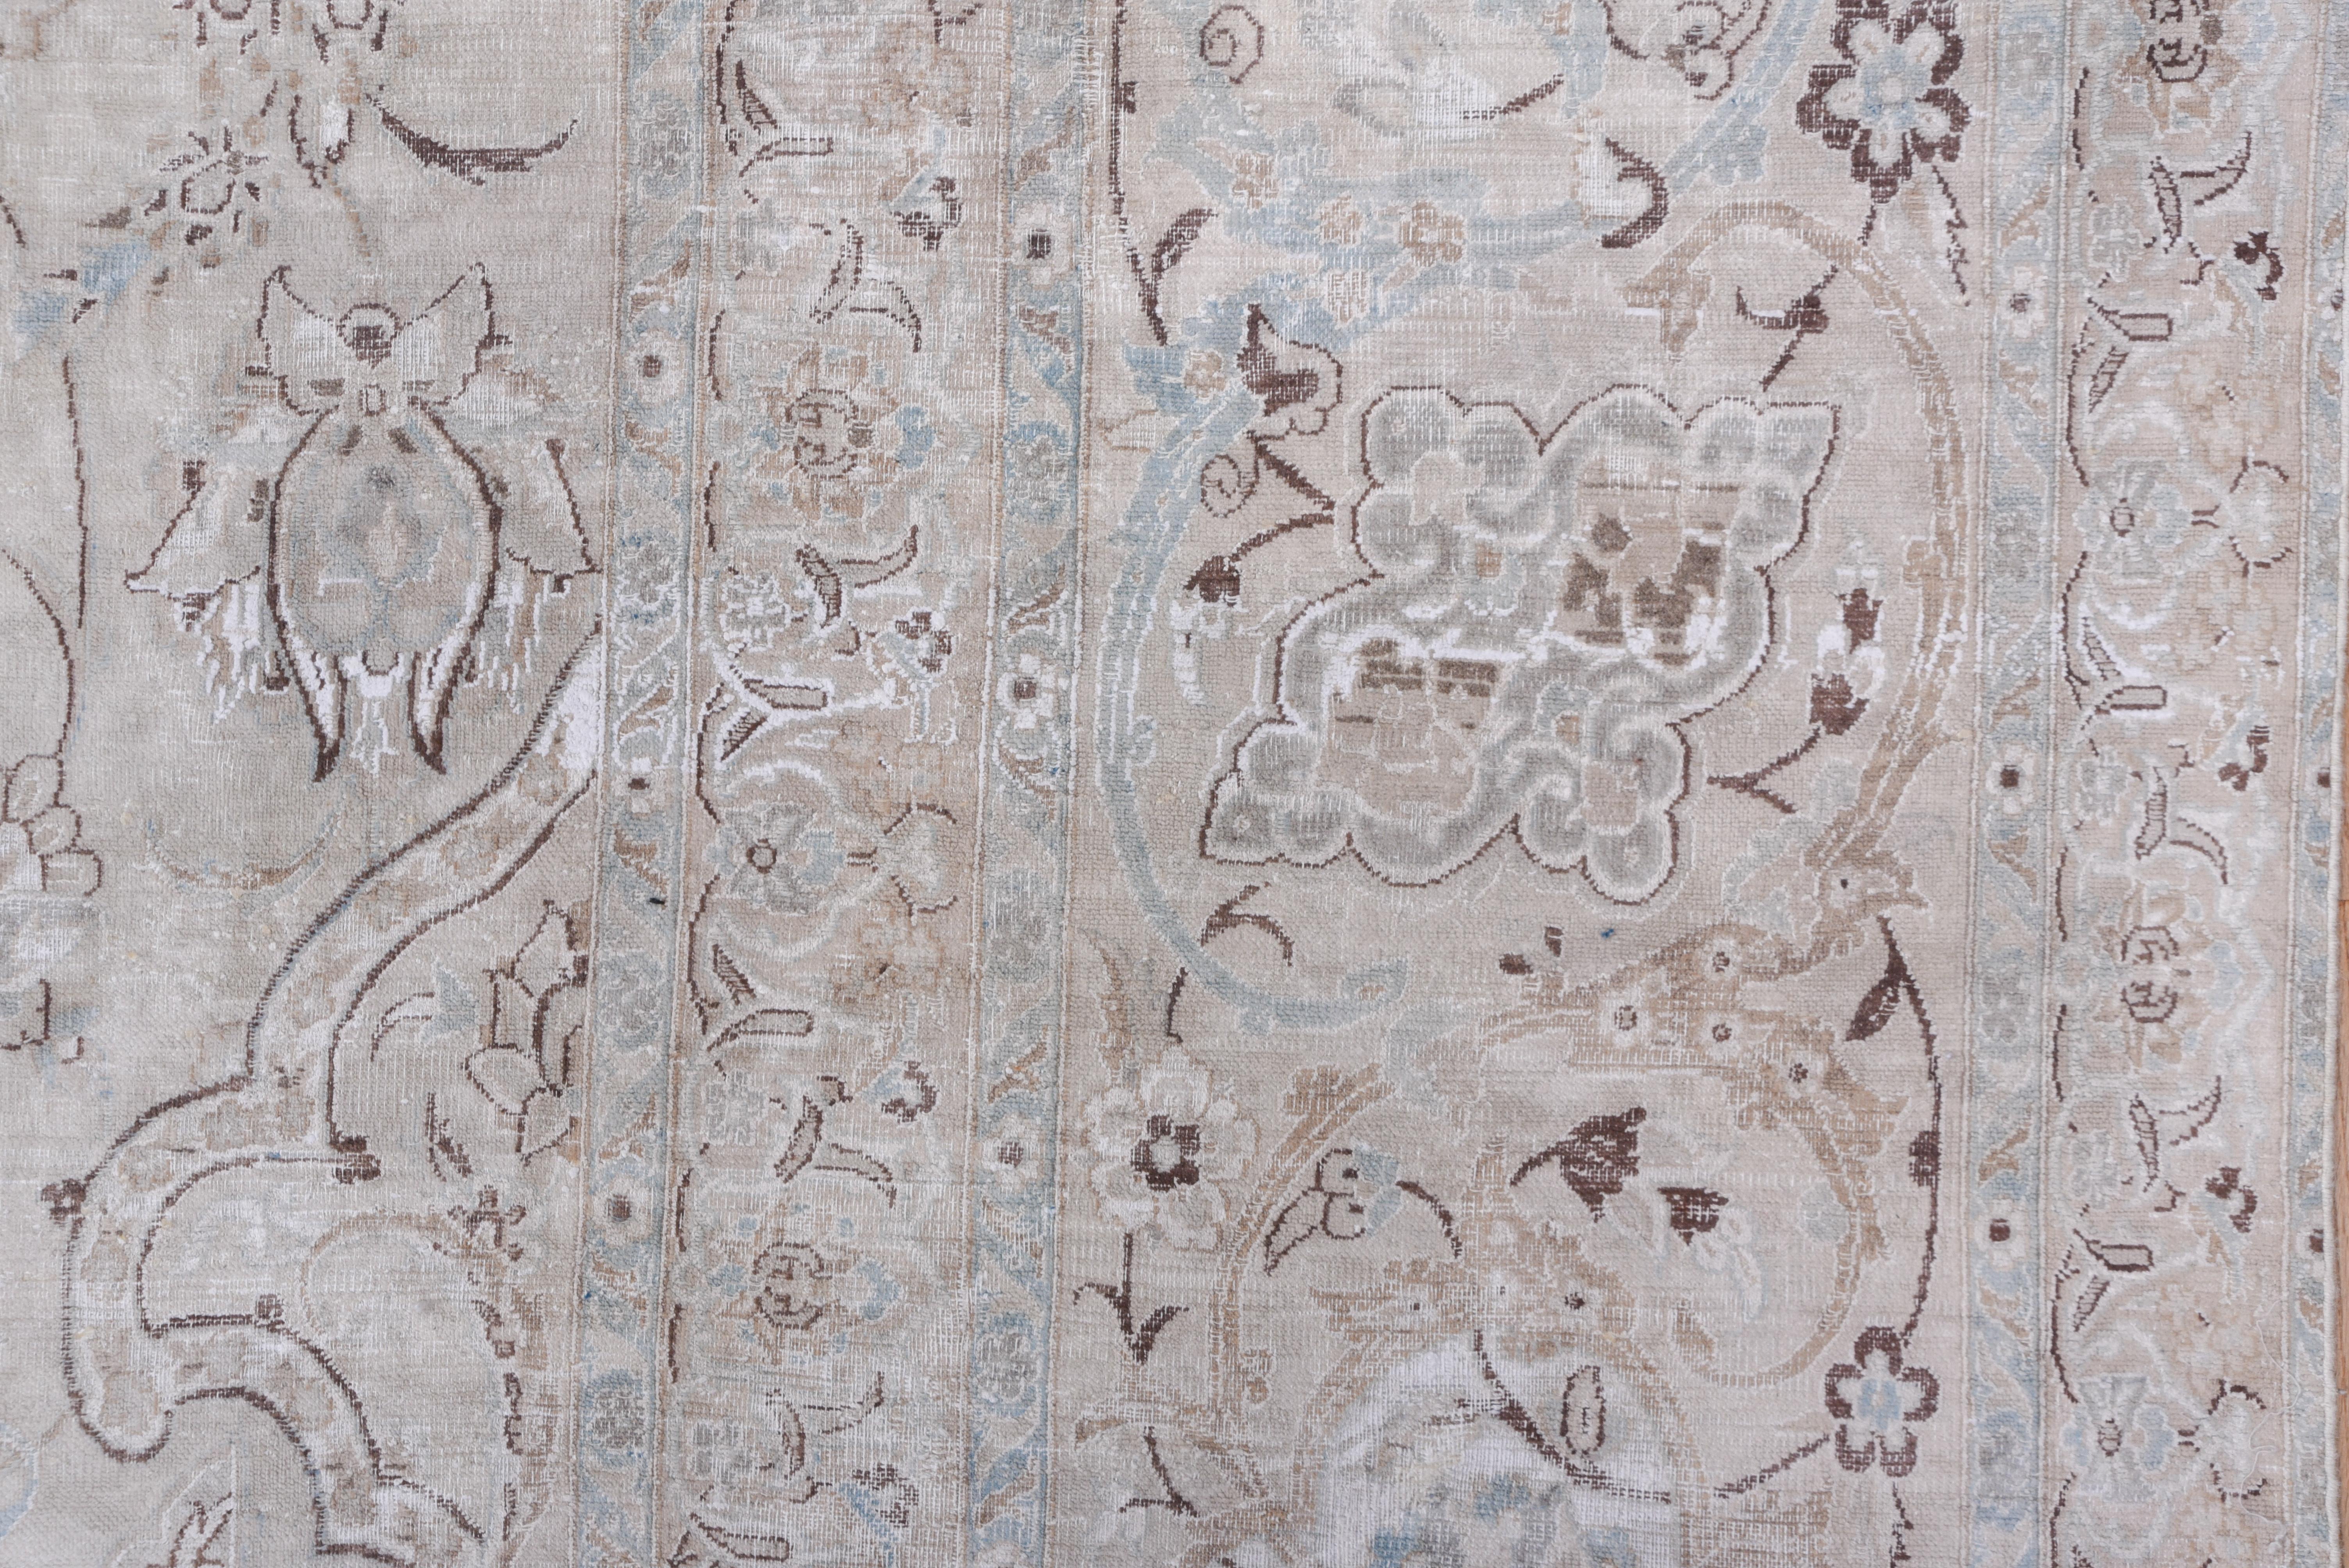 This eastern Turkish town carpet has an essentially tone-on-tone floral pattern on an eggshell ground. The border of this good condition interwar carpet continues the tonality and pattern of the field.